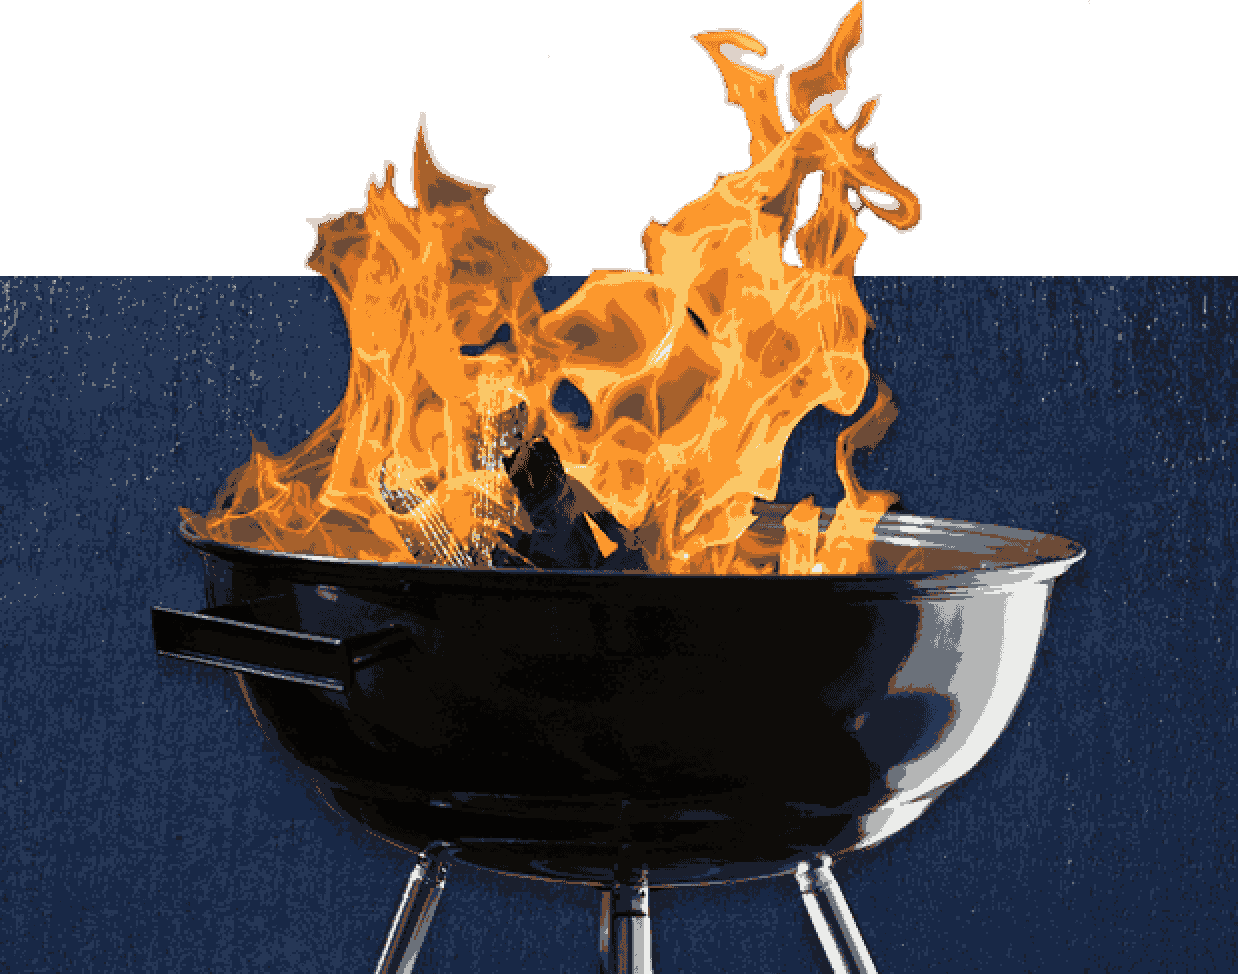 Barbecue grill with wood on fire